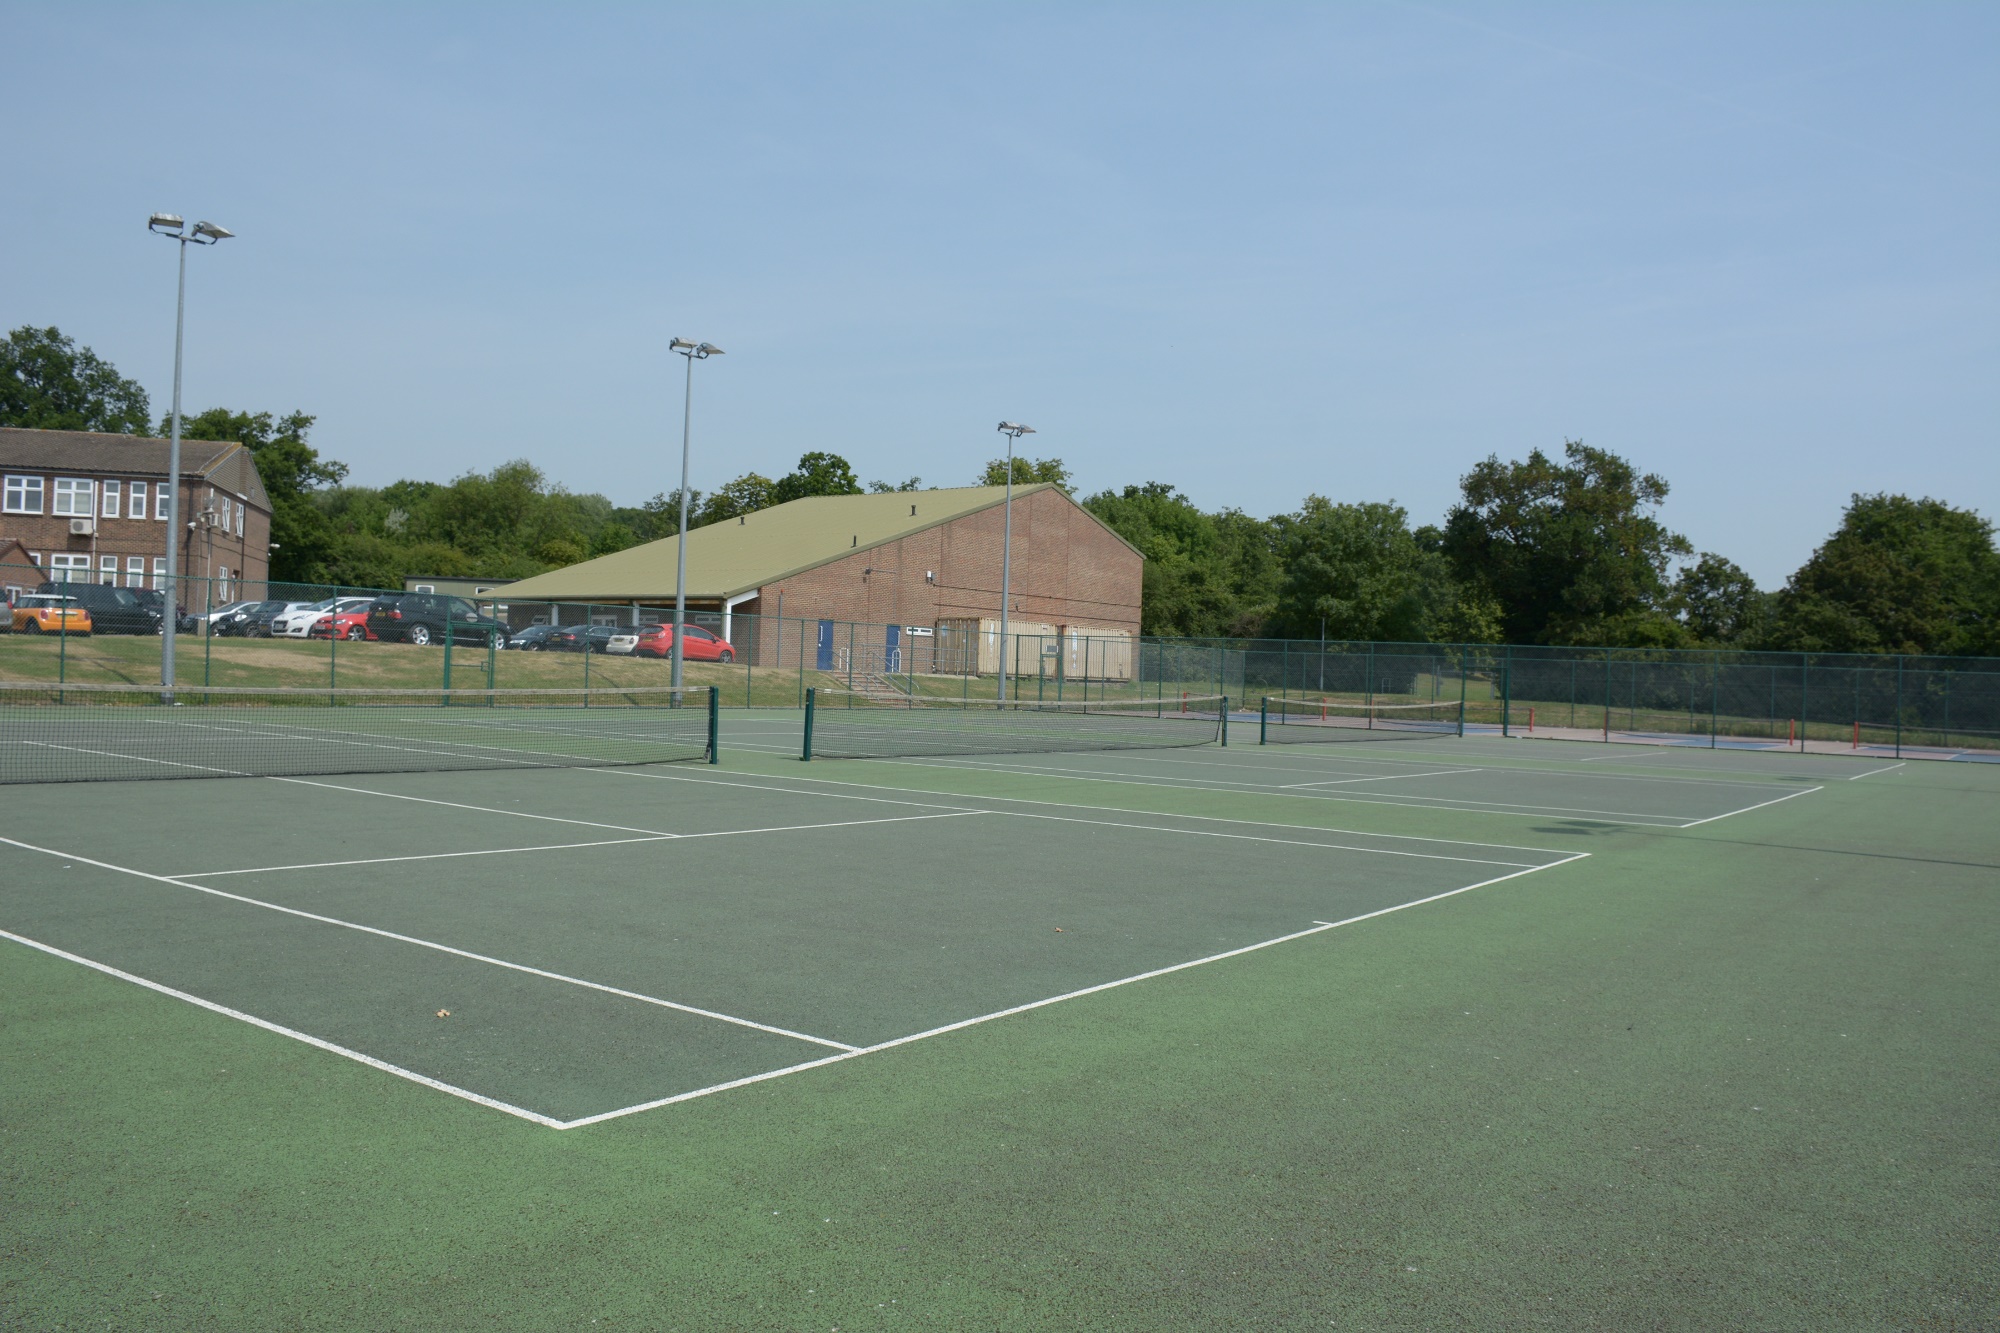 Full size tennis courts